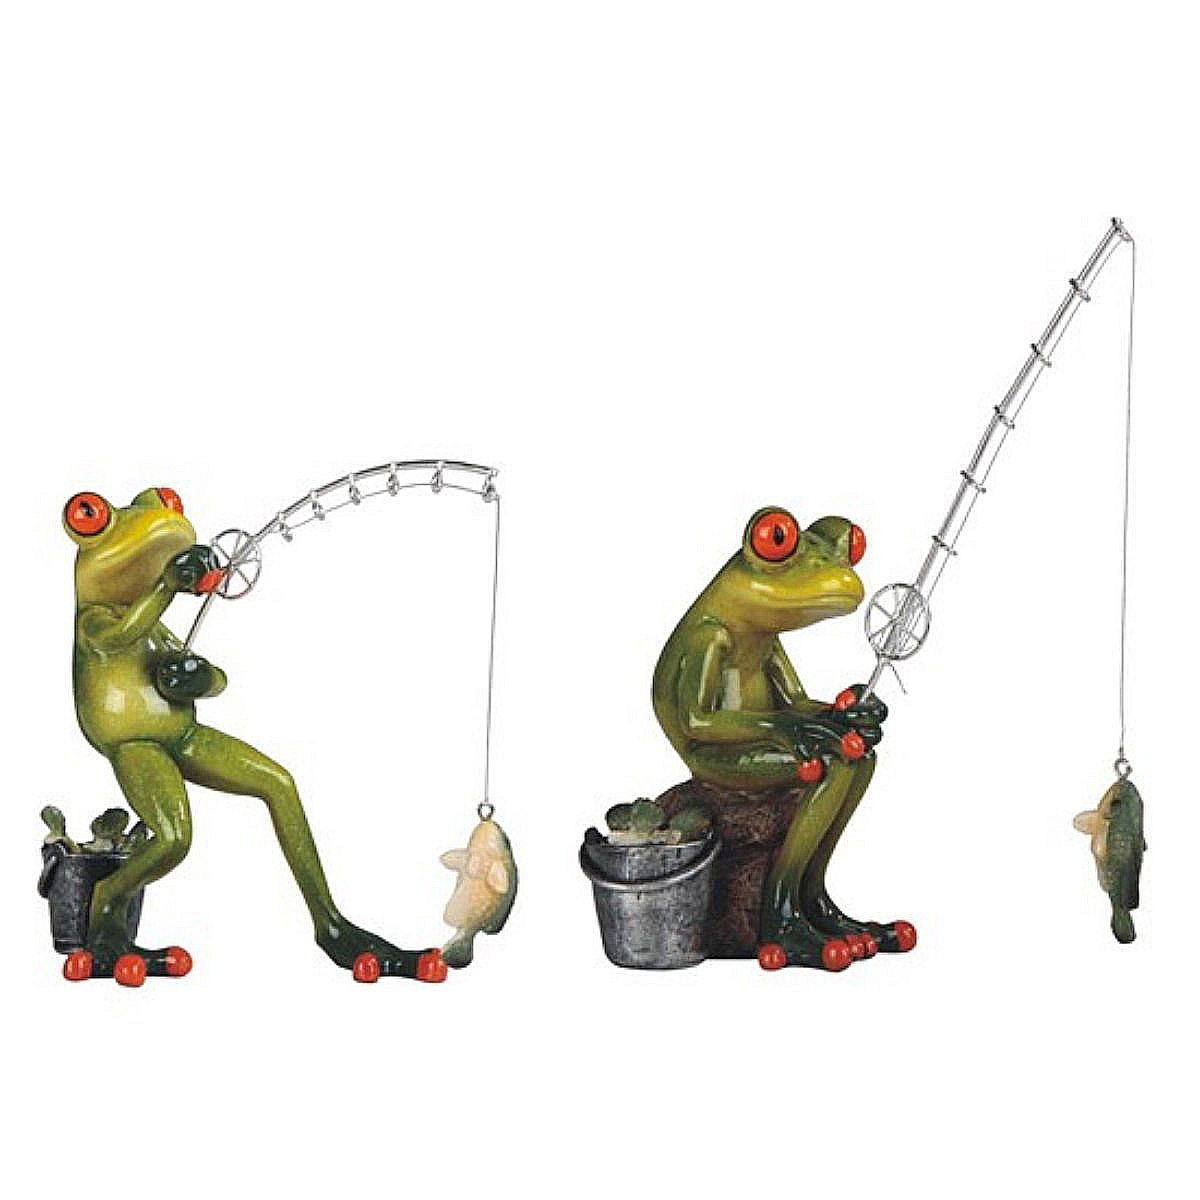 Fishing Frog Stock Photos - 4,178 Images